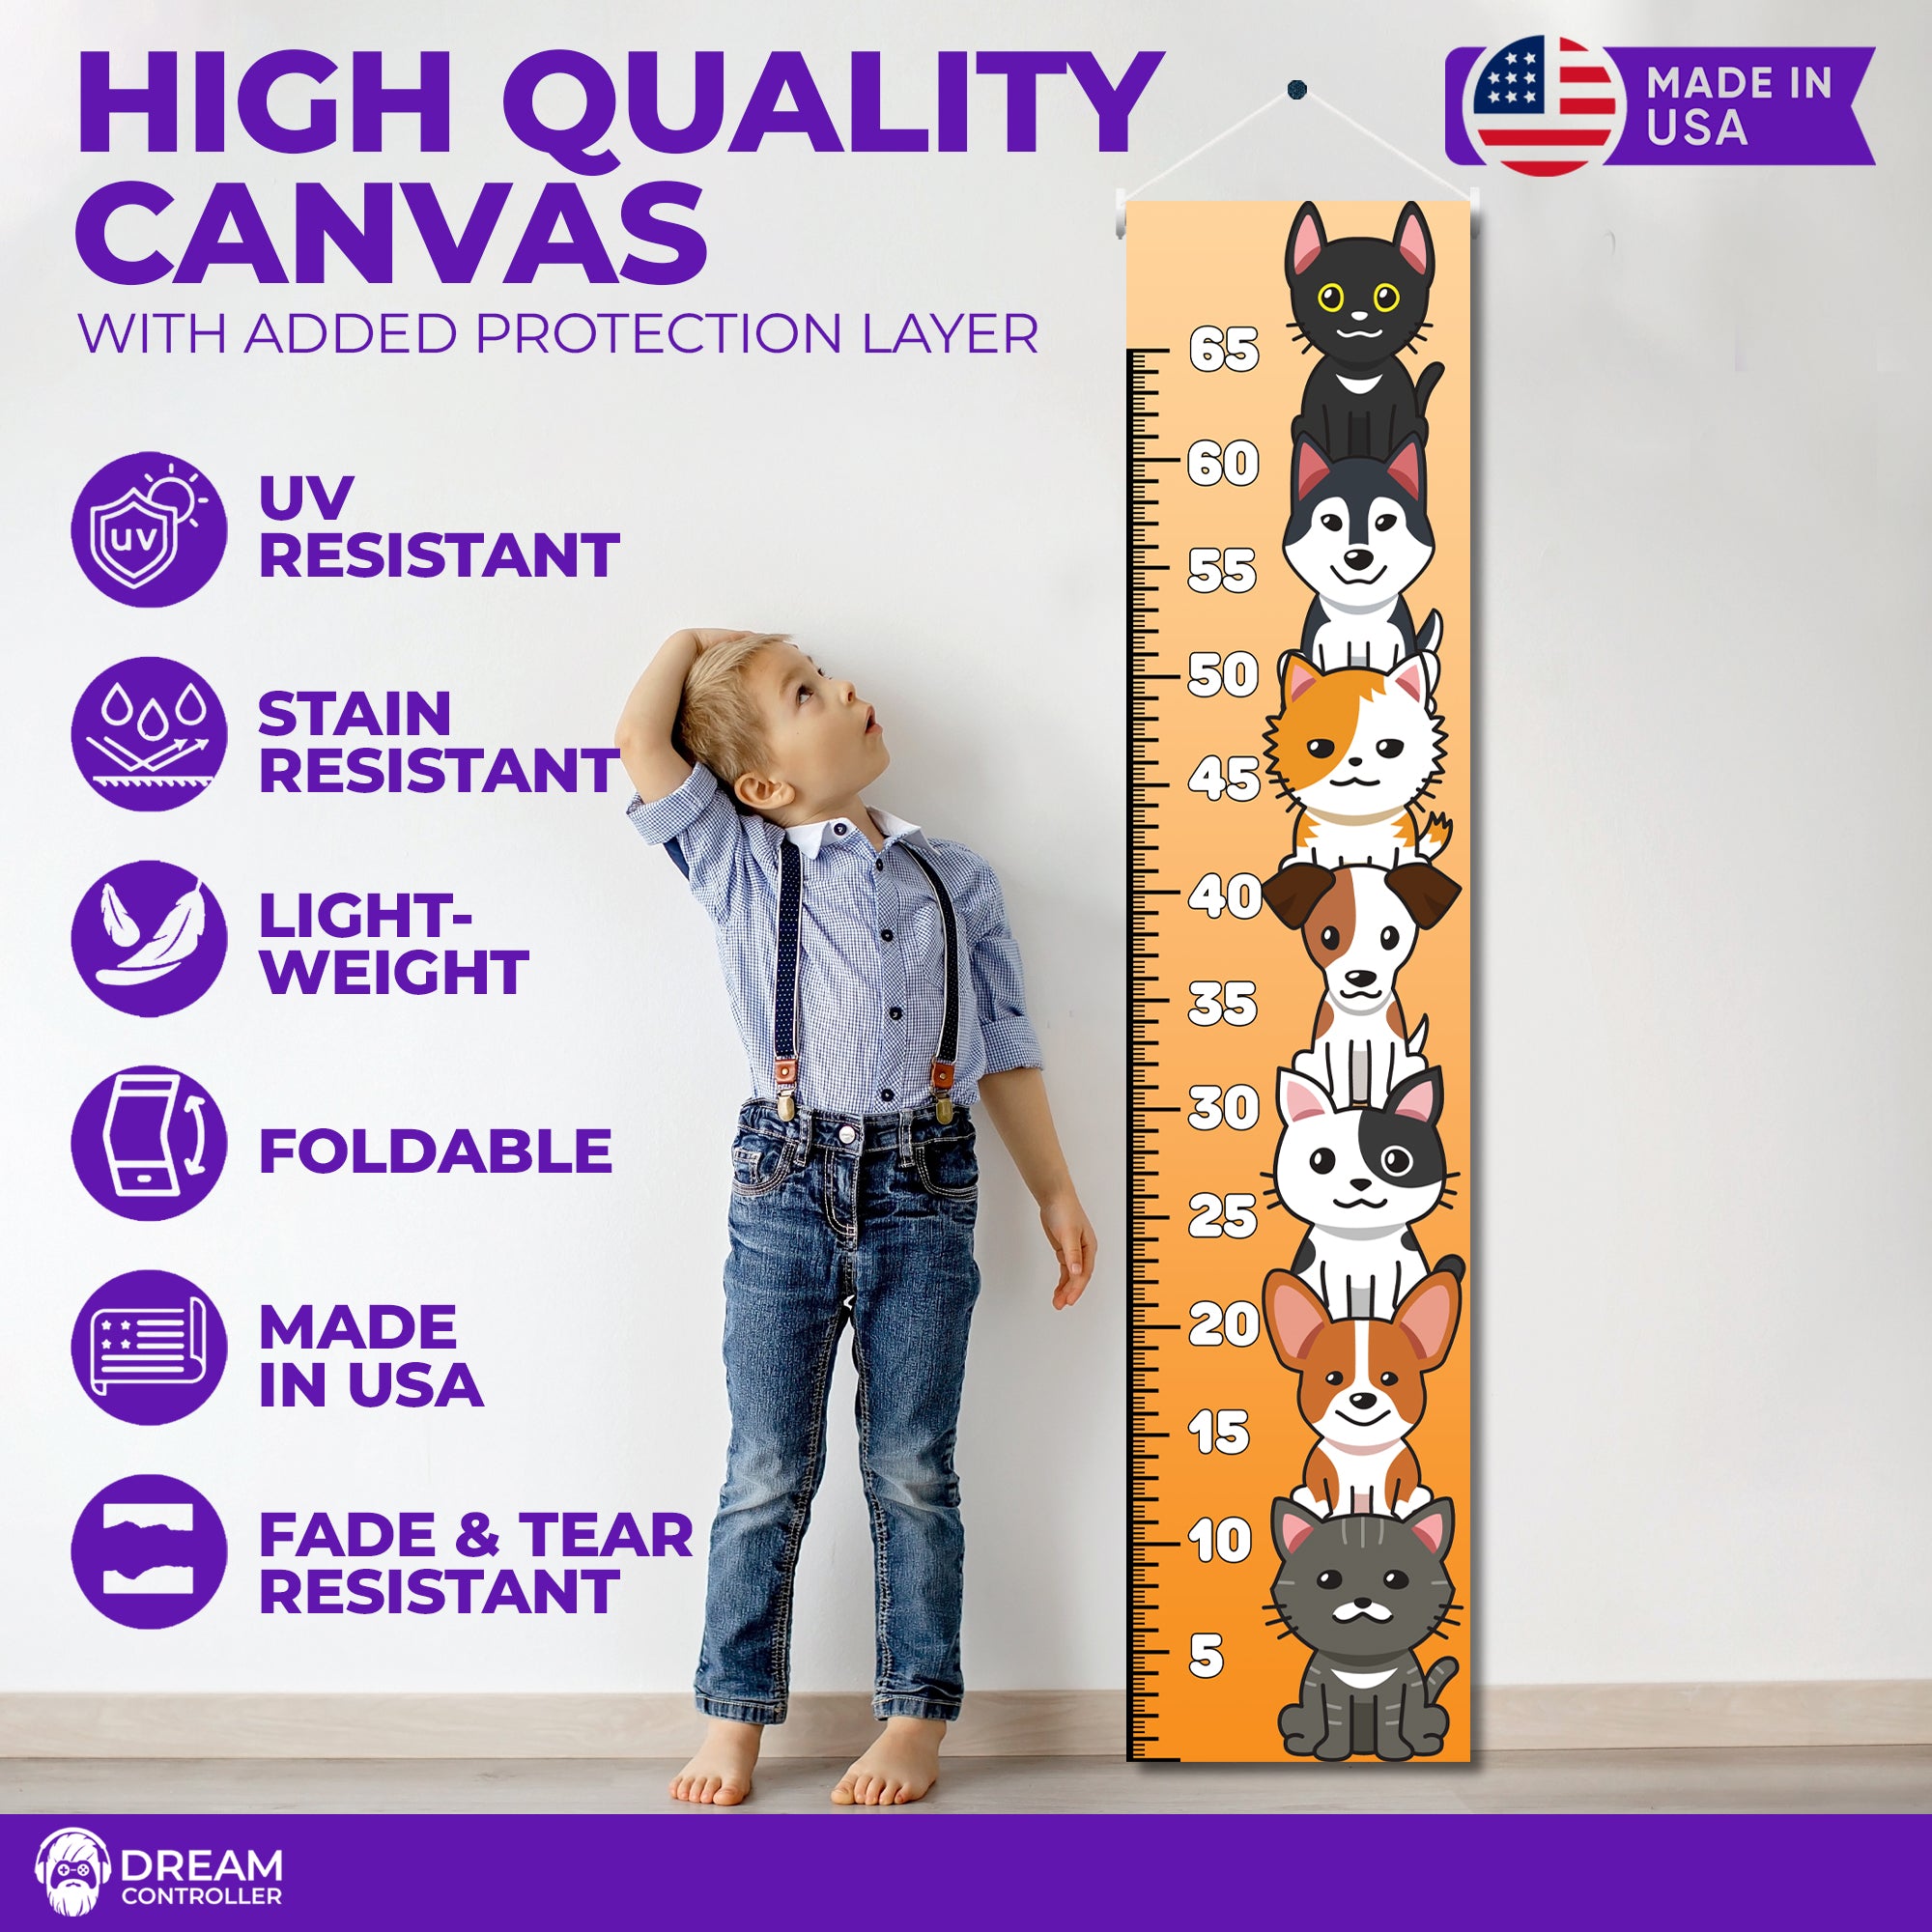 Dogs and Cats Kids Growth Chart